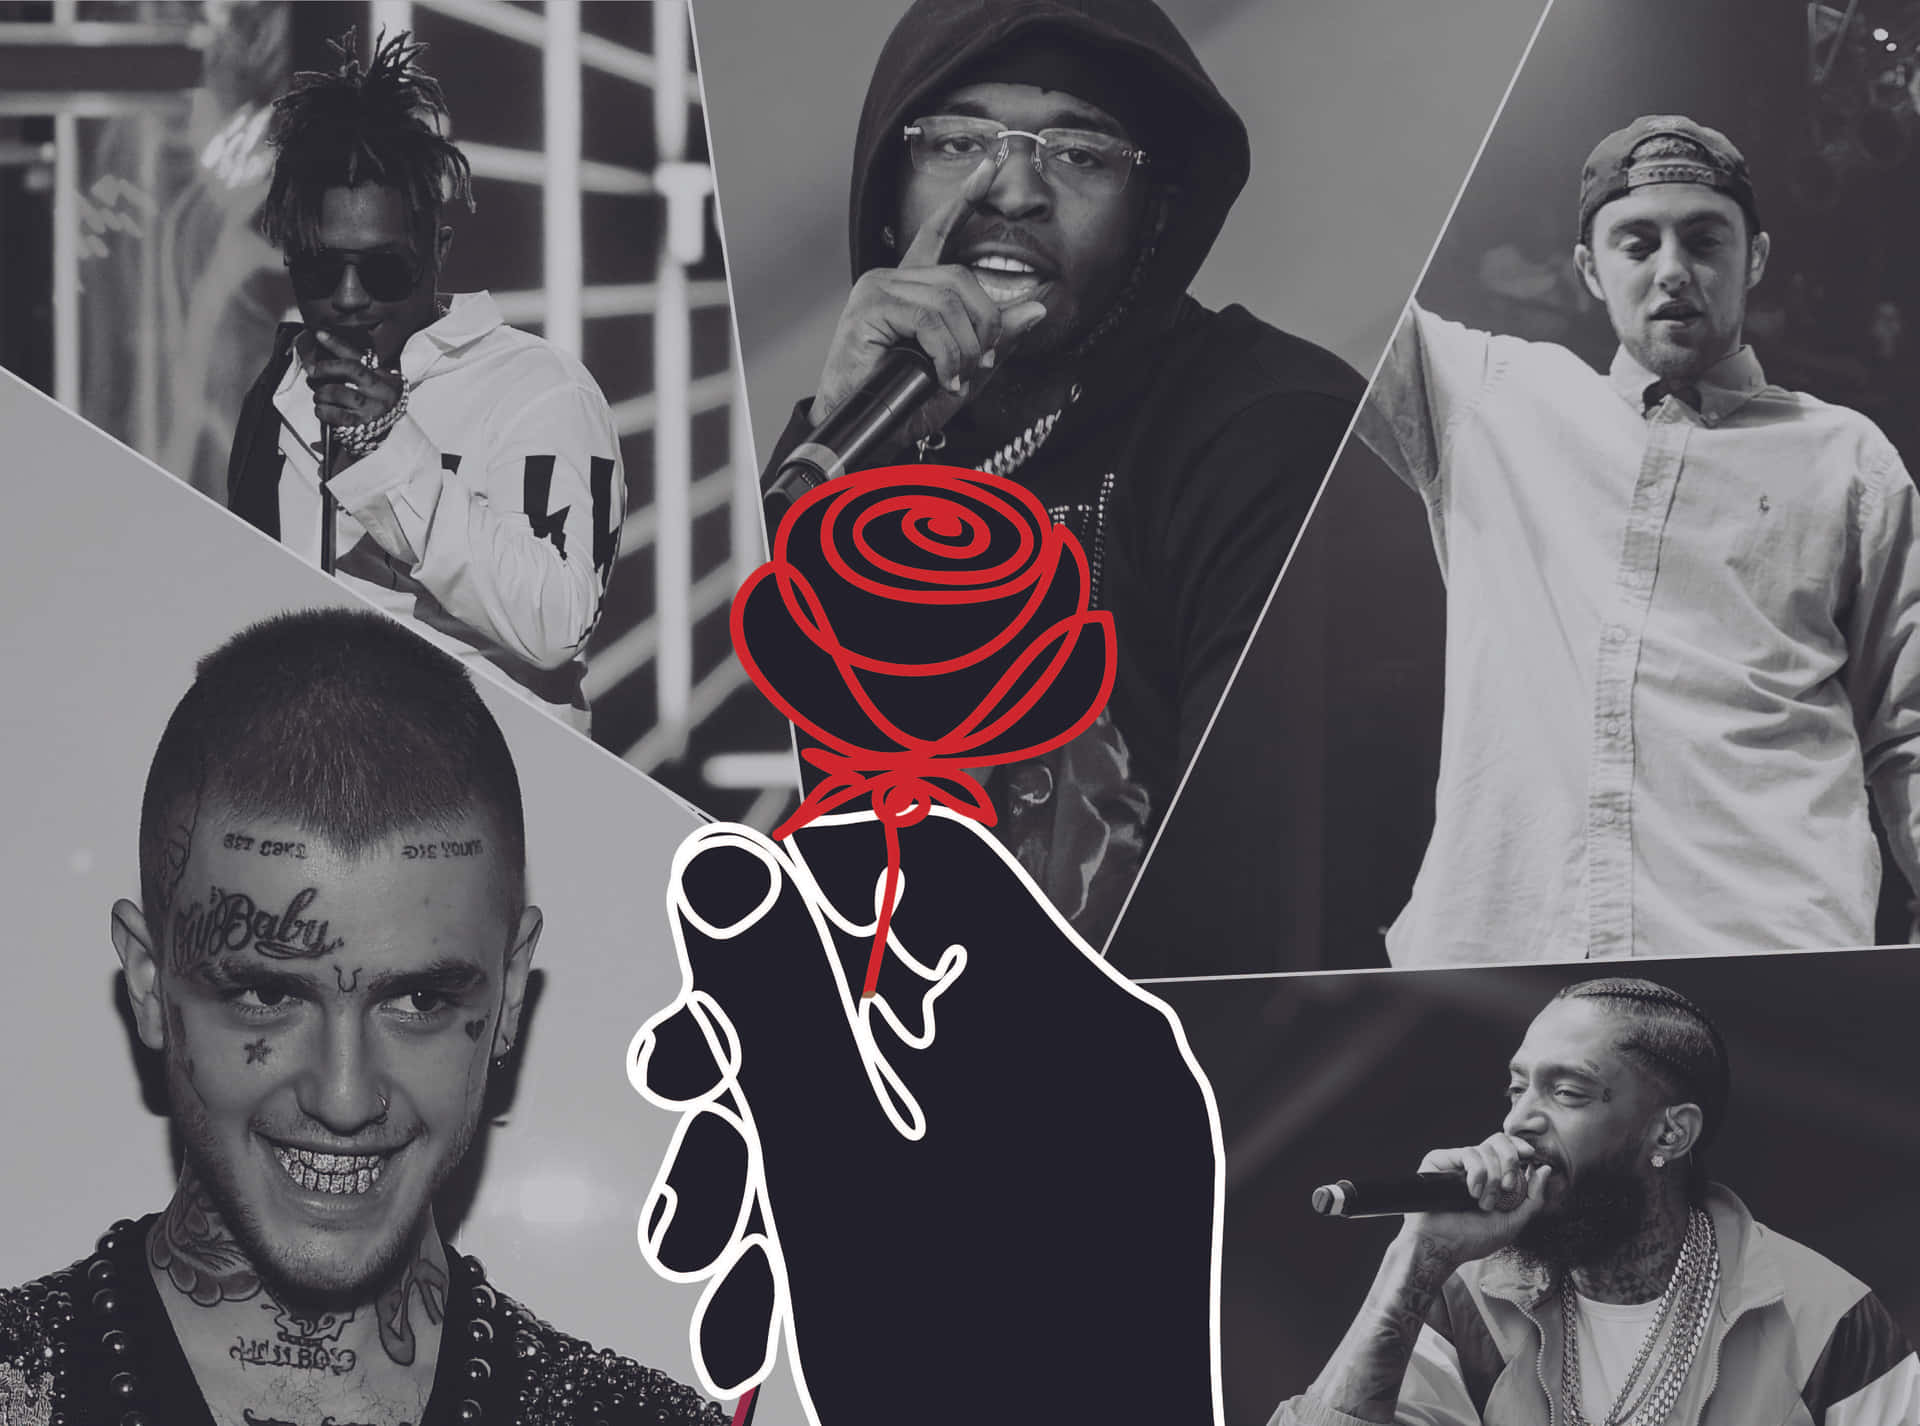 A Collage Of Pictures Of People With A Rose Wallpaper